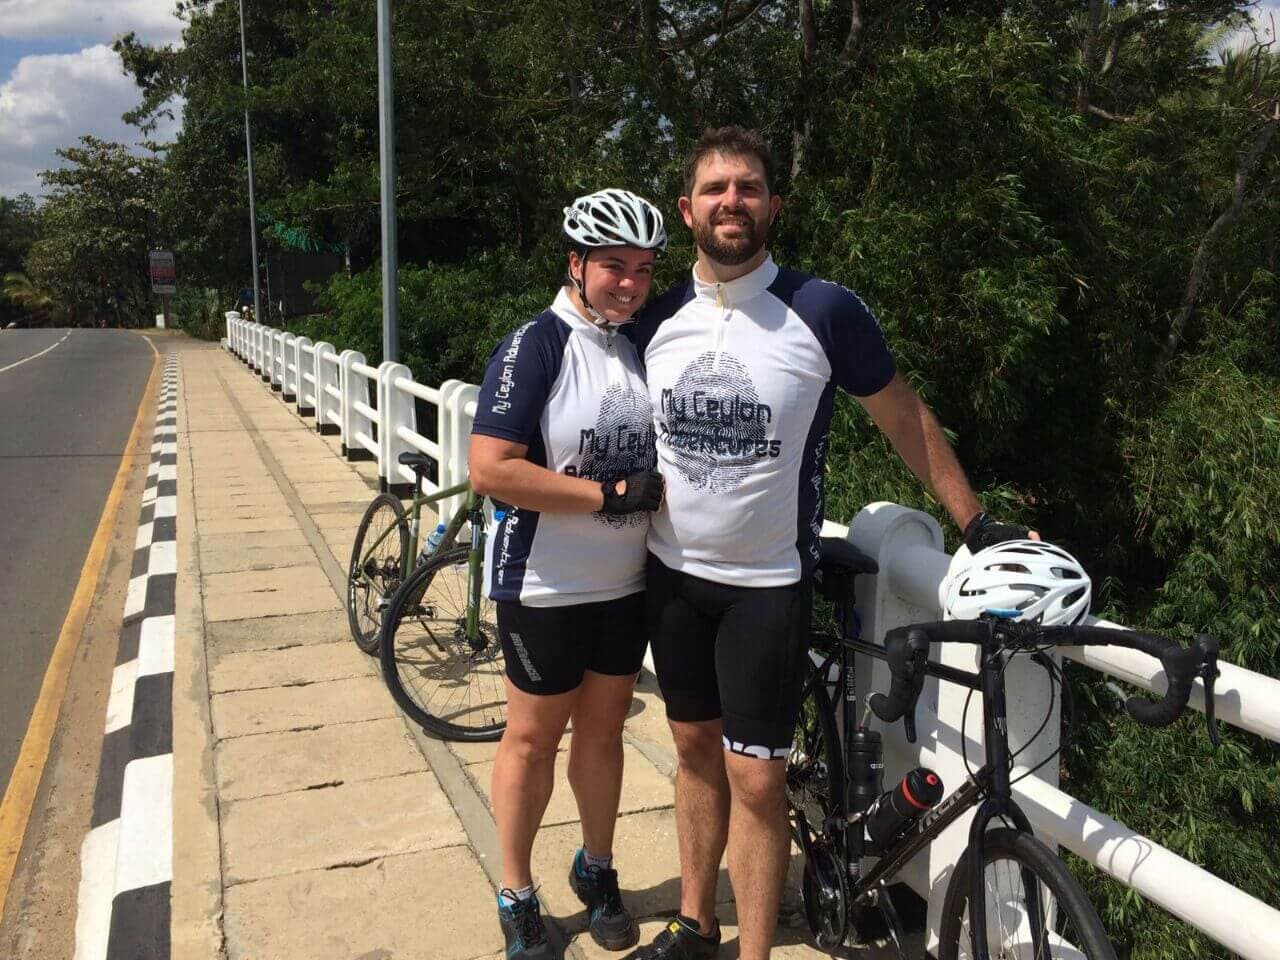 A couple take a break on the bridge during the cycling tour